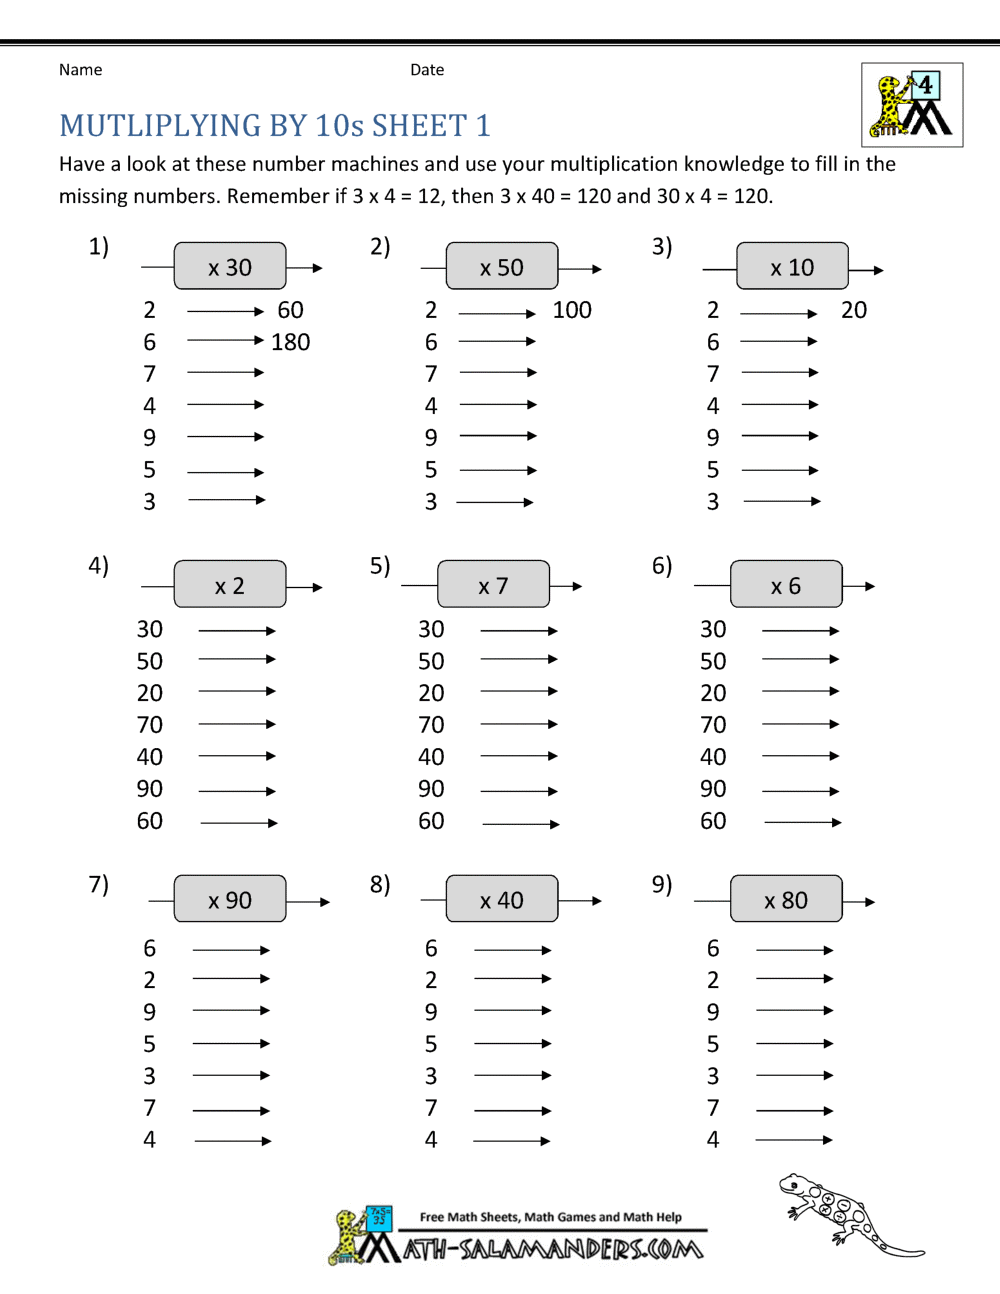 multiplication-worksheets-for-grade-2-3-20-sheets-pdf-year-2-3-4-grade-2-3-4-numeracy